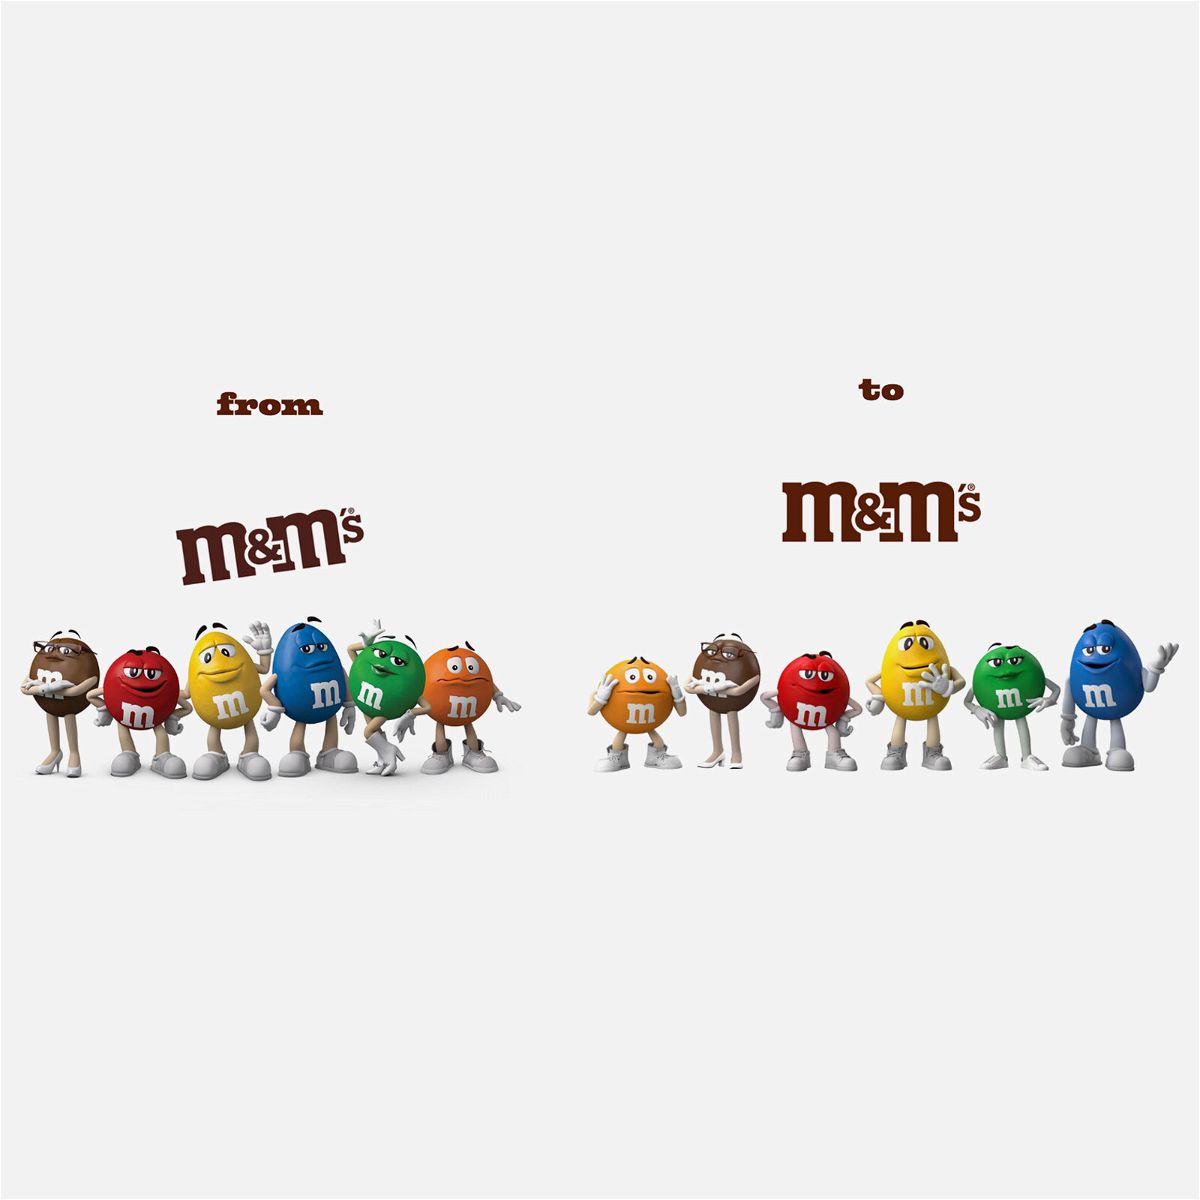 M&M's introduces new 'spokescandy' for the first time in 10 years